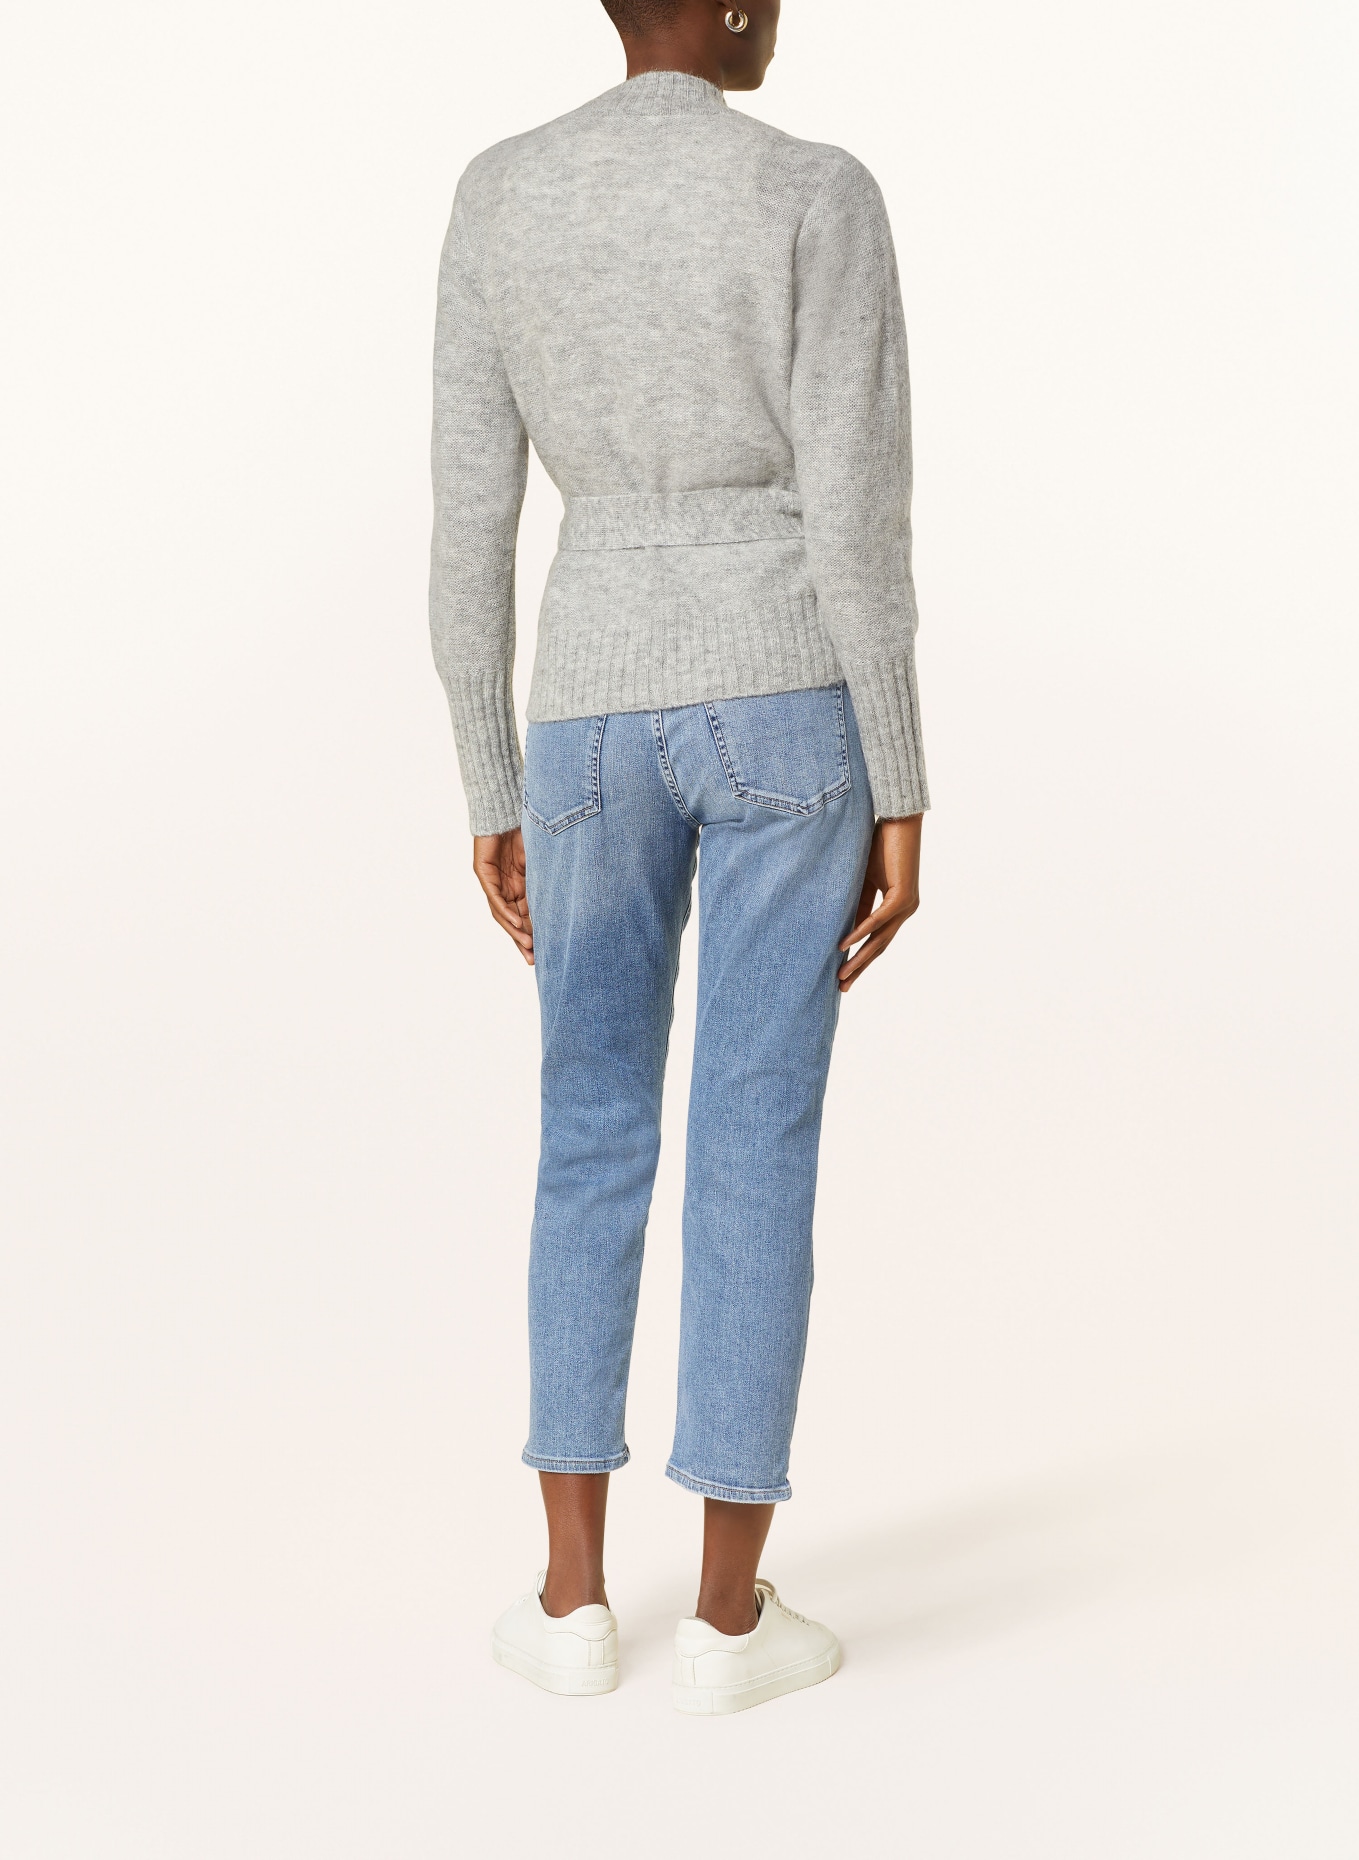 TED BAKER Cardigan ELLIIAN with mohair, Color: GRAY (Image 3)